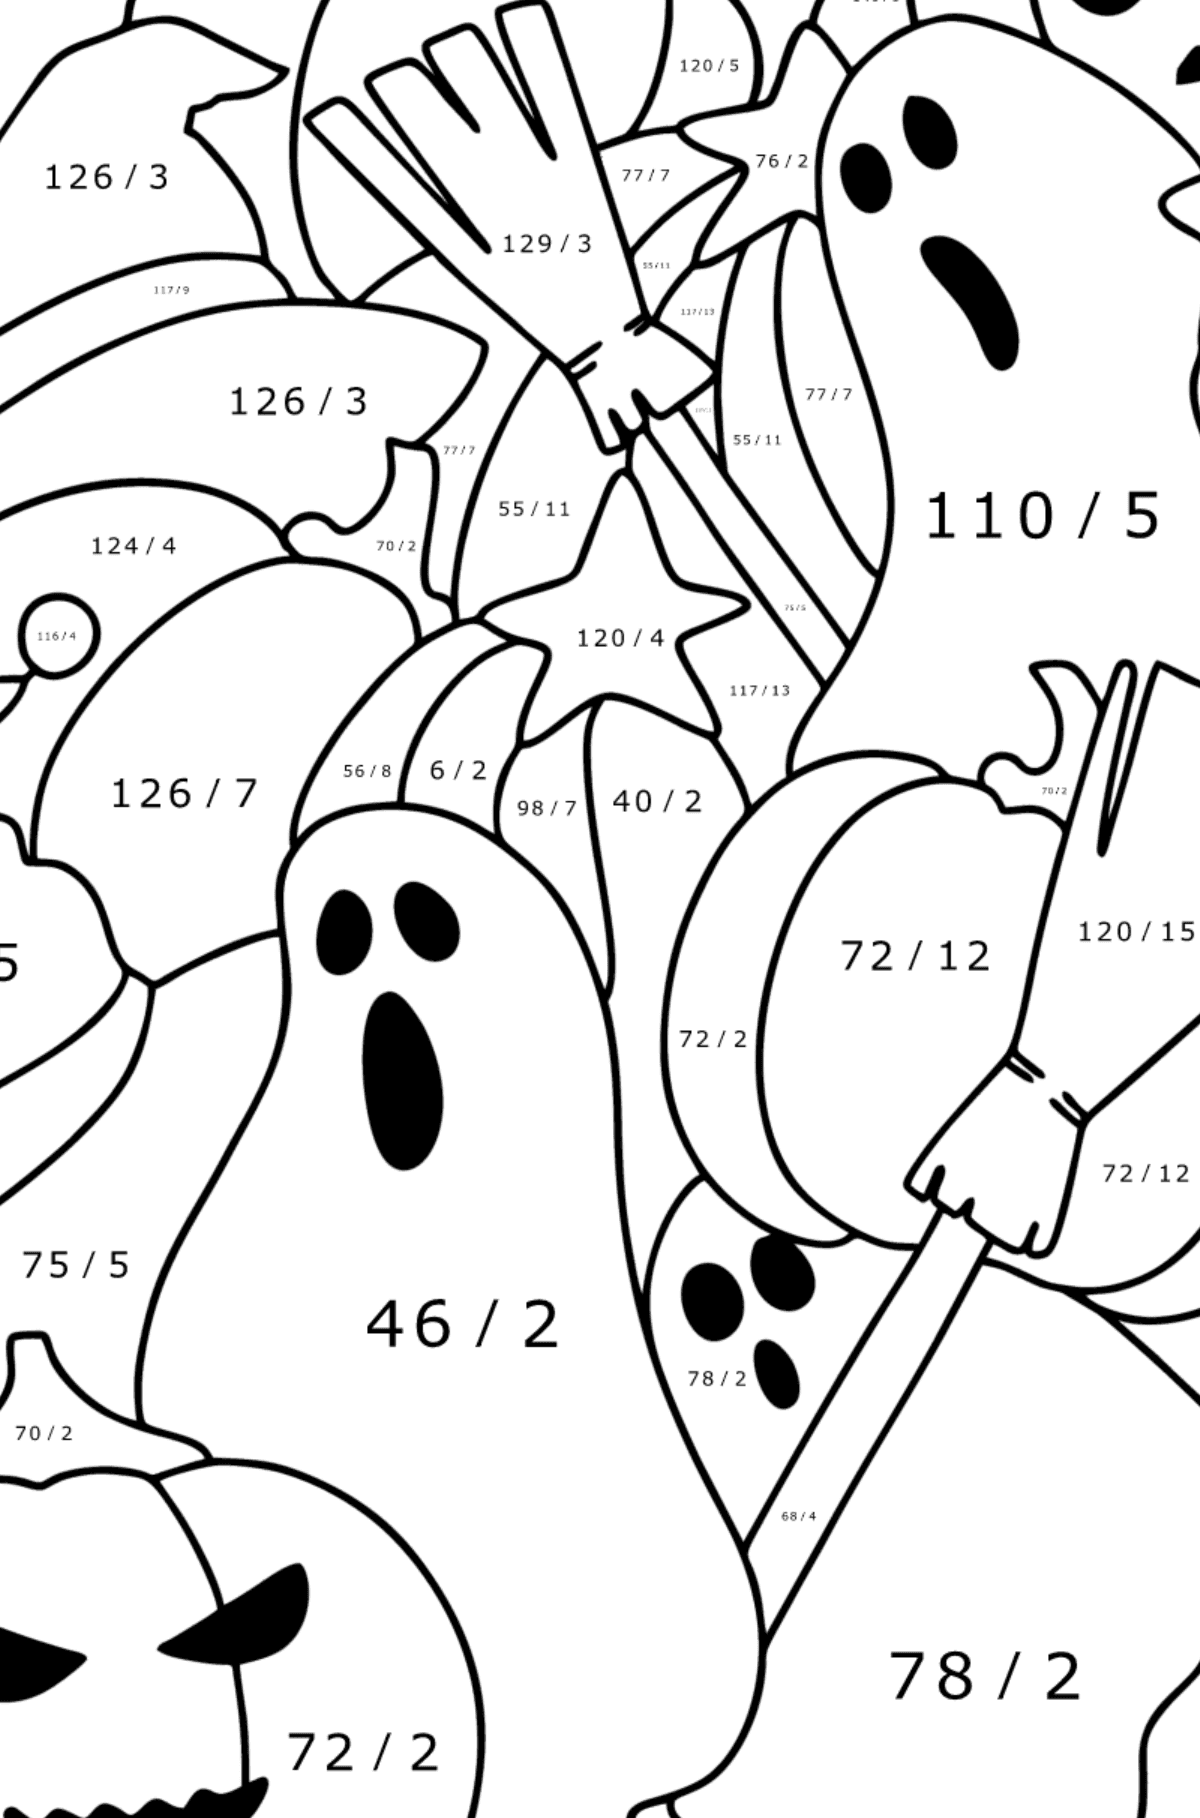 Doodle Сoloring page for Kids - Halloween - Math Coloring - Division for Kids